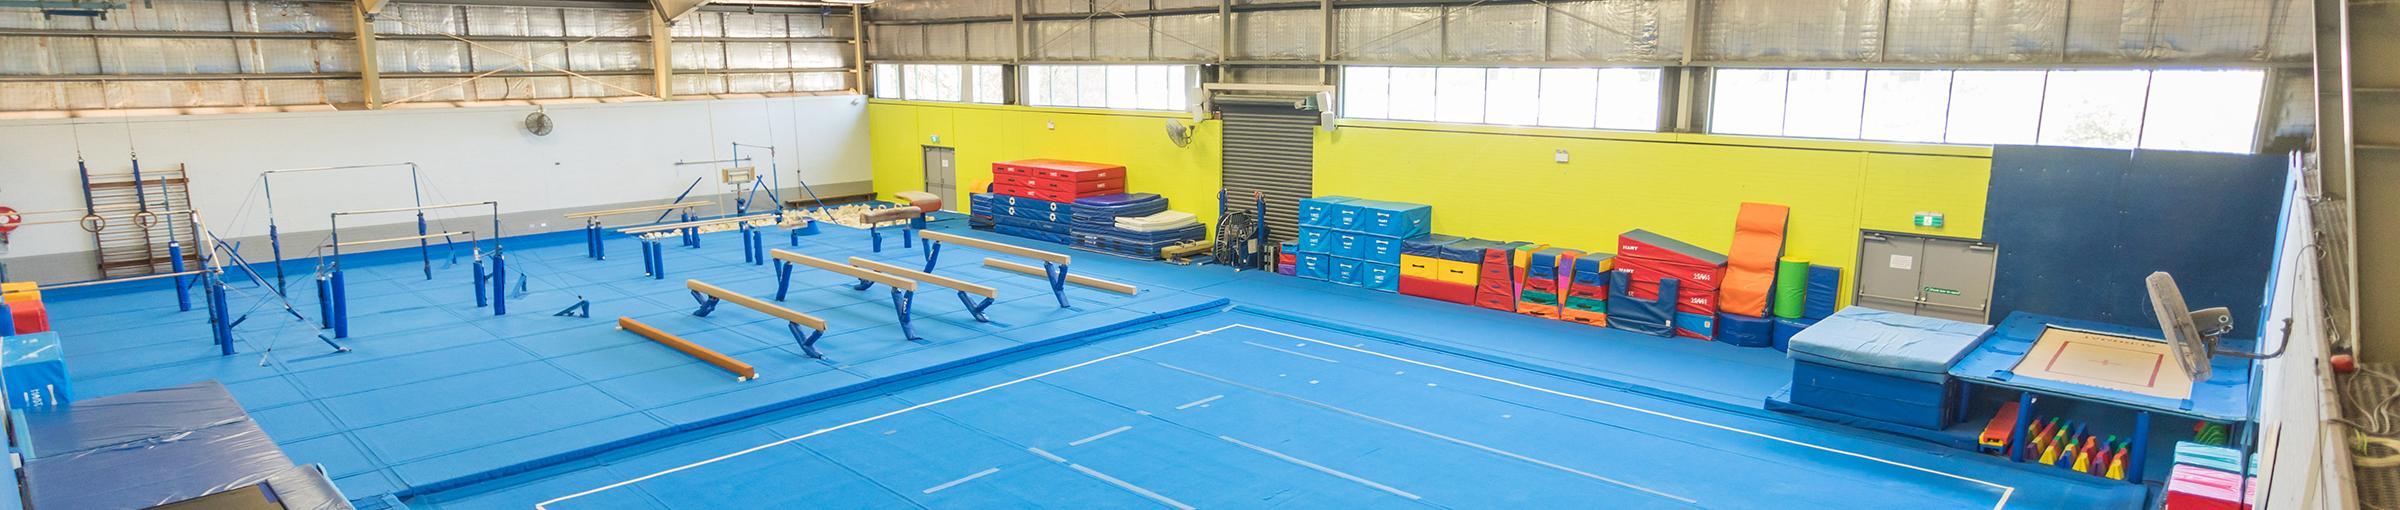 Image of large indoor gymnastics centre with beams and foam mats